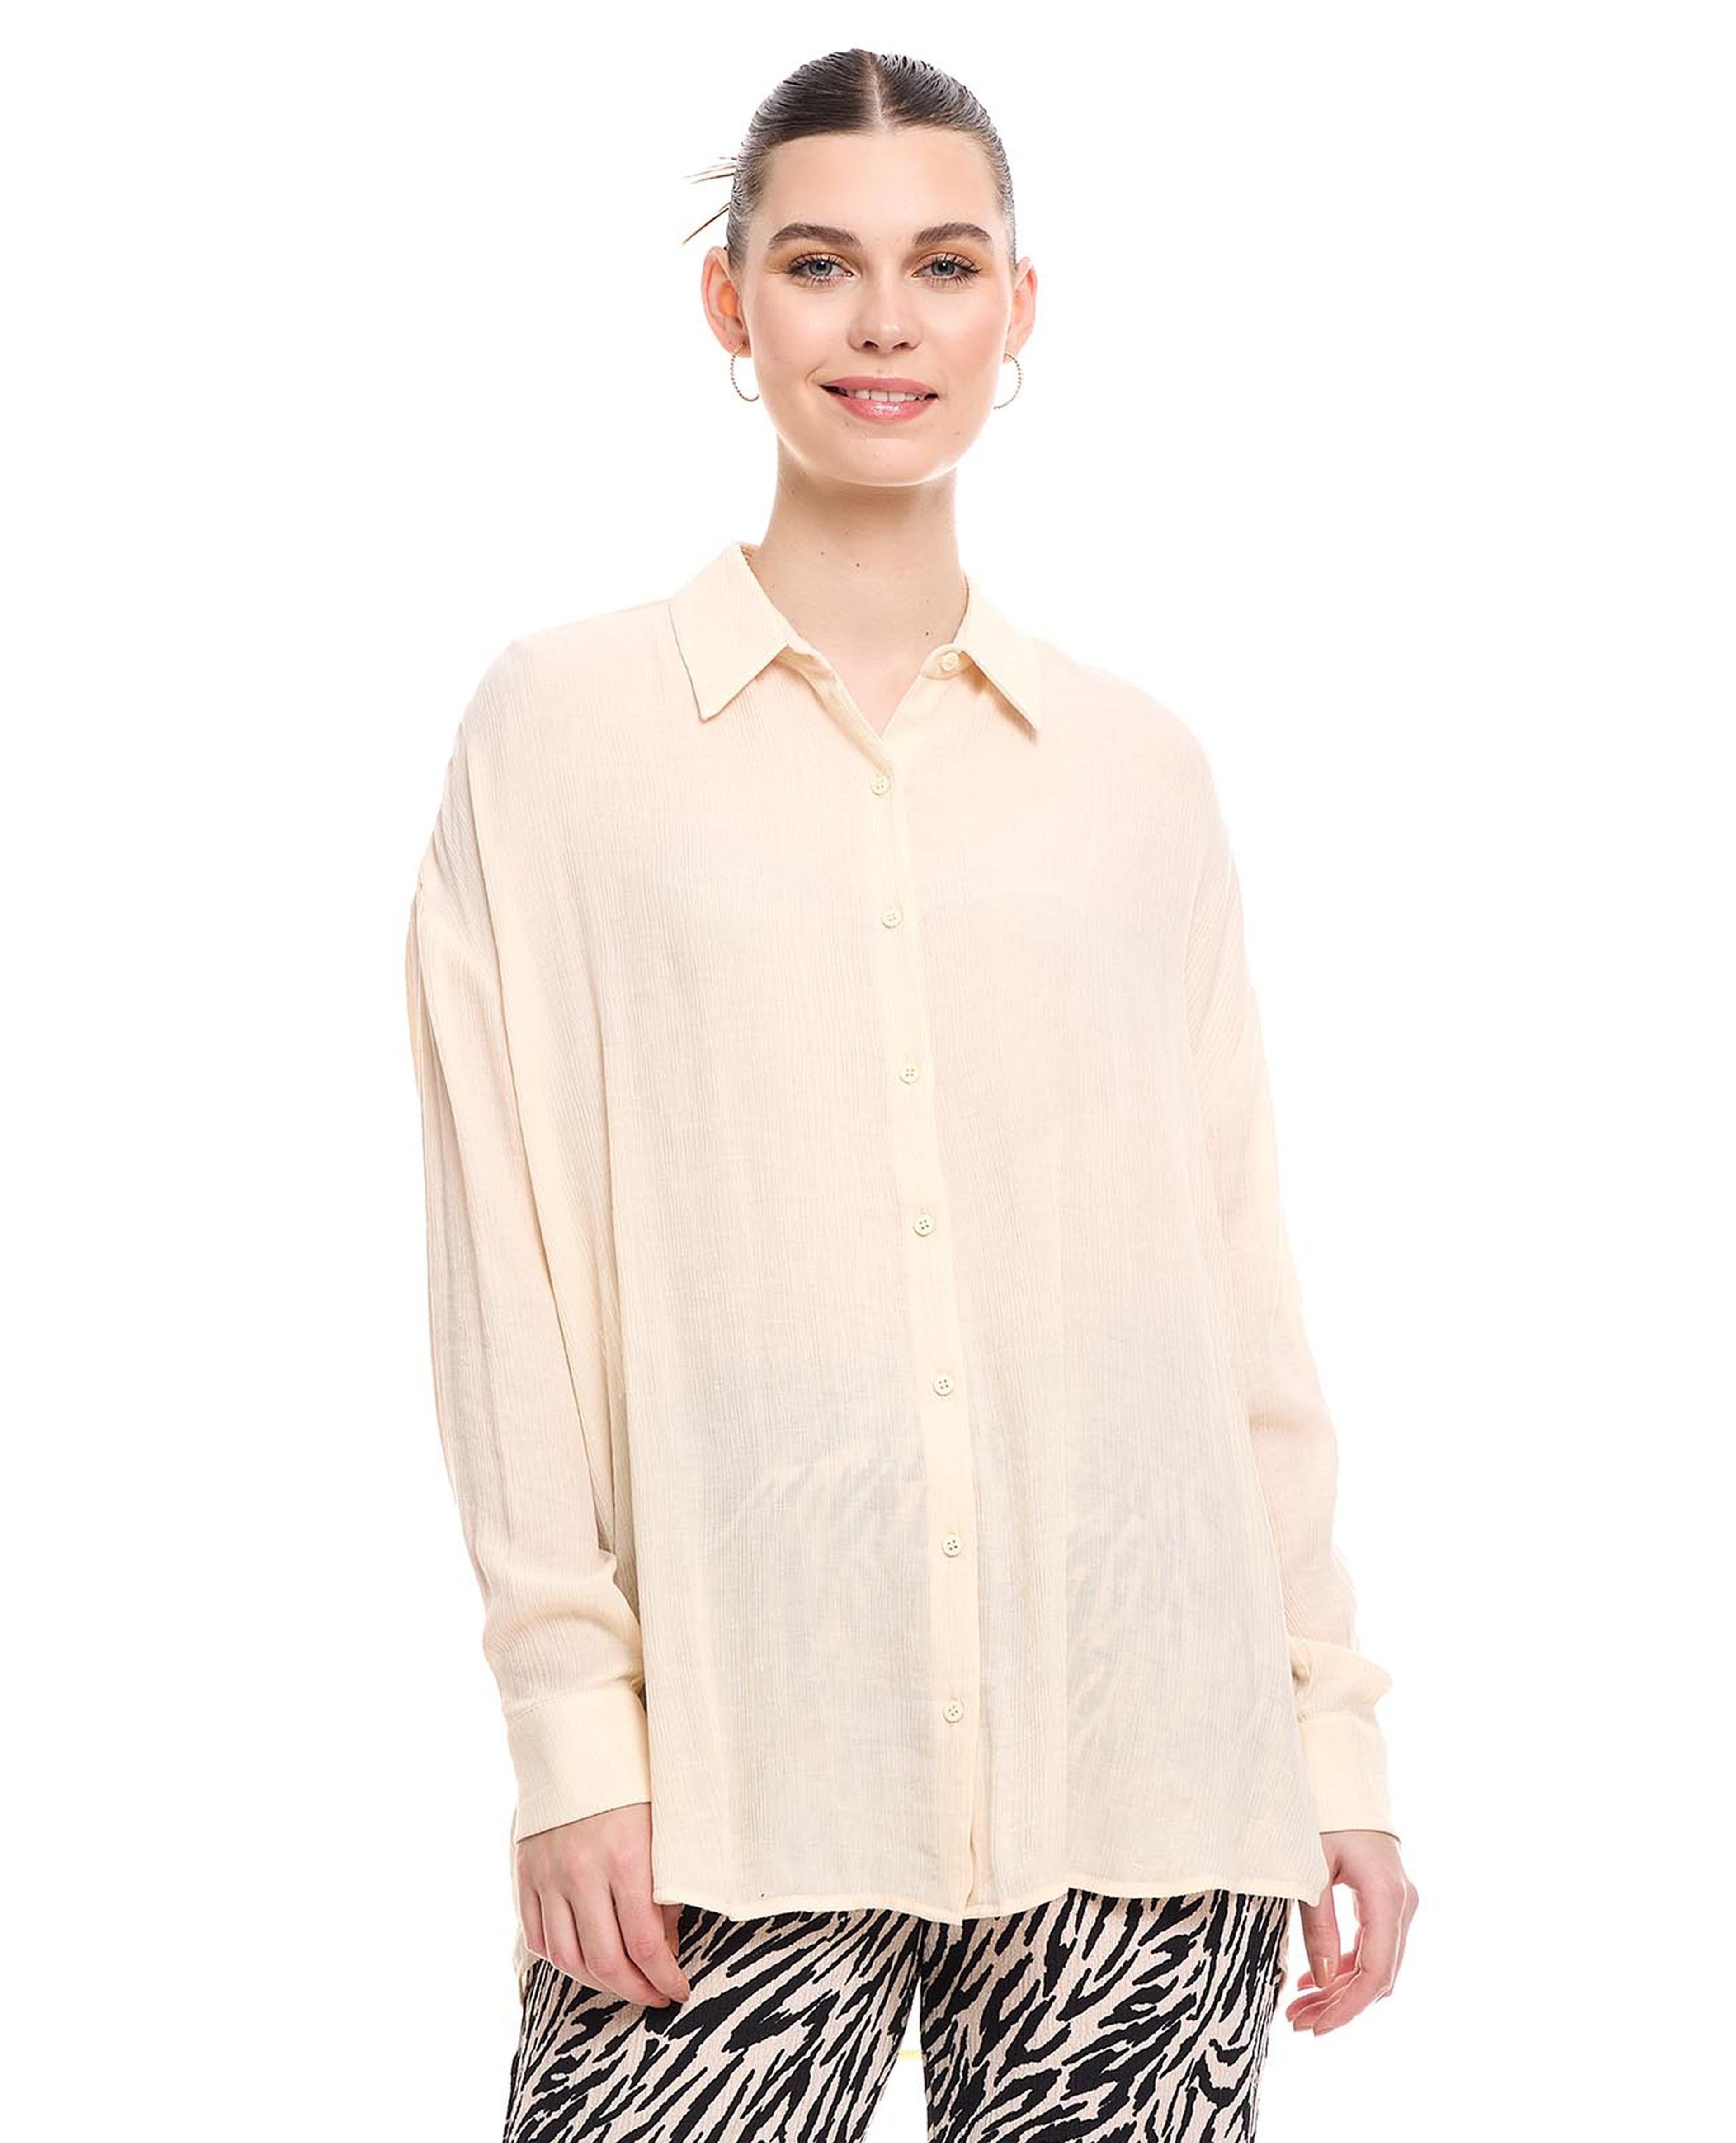 Textured Tunic Shirt with Classic Collar and Long Sleeves